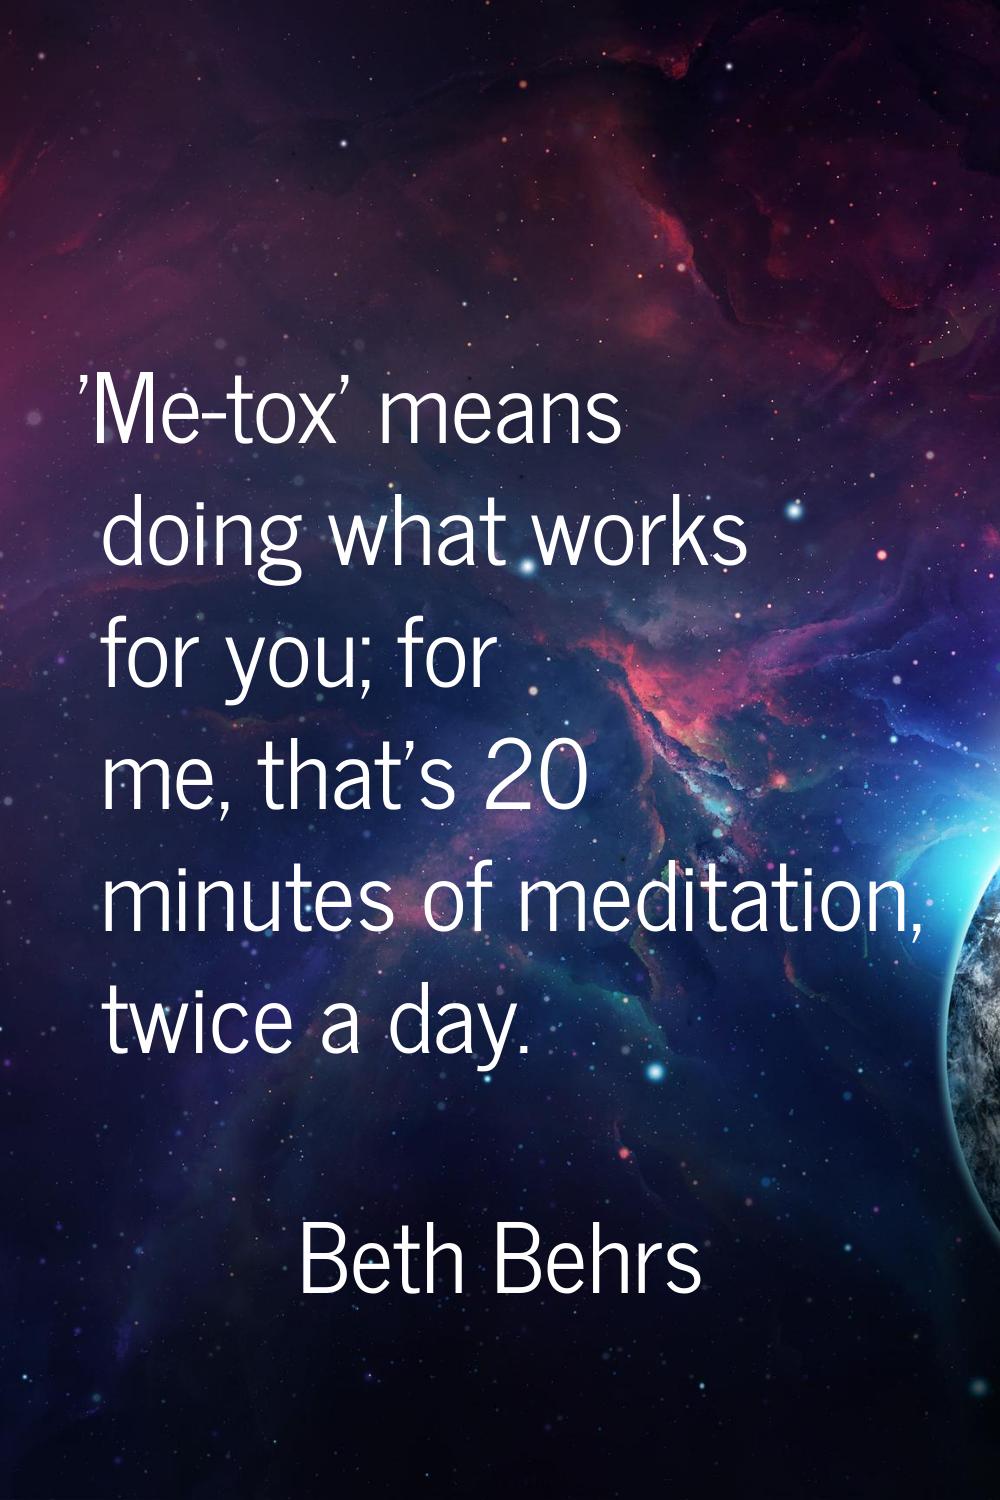 'Me-tox' means doing what works for you; for me, that's 20 minutes of meditation, twice a day.